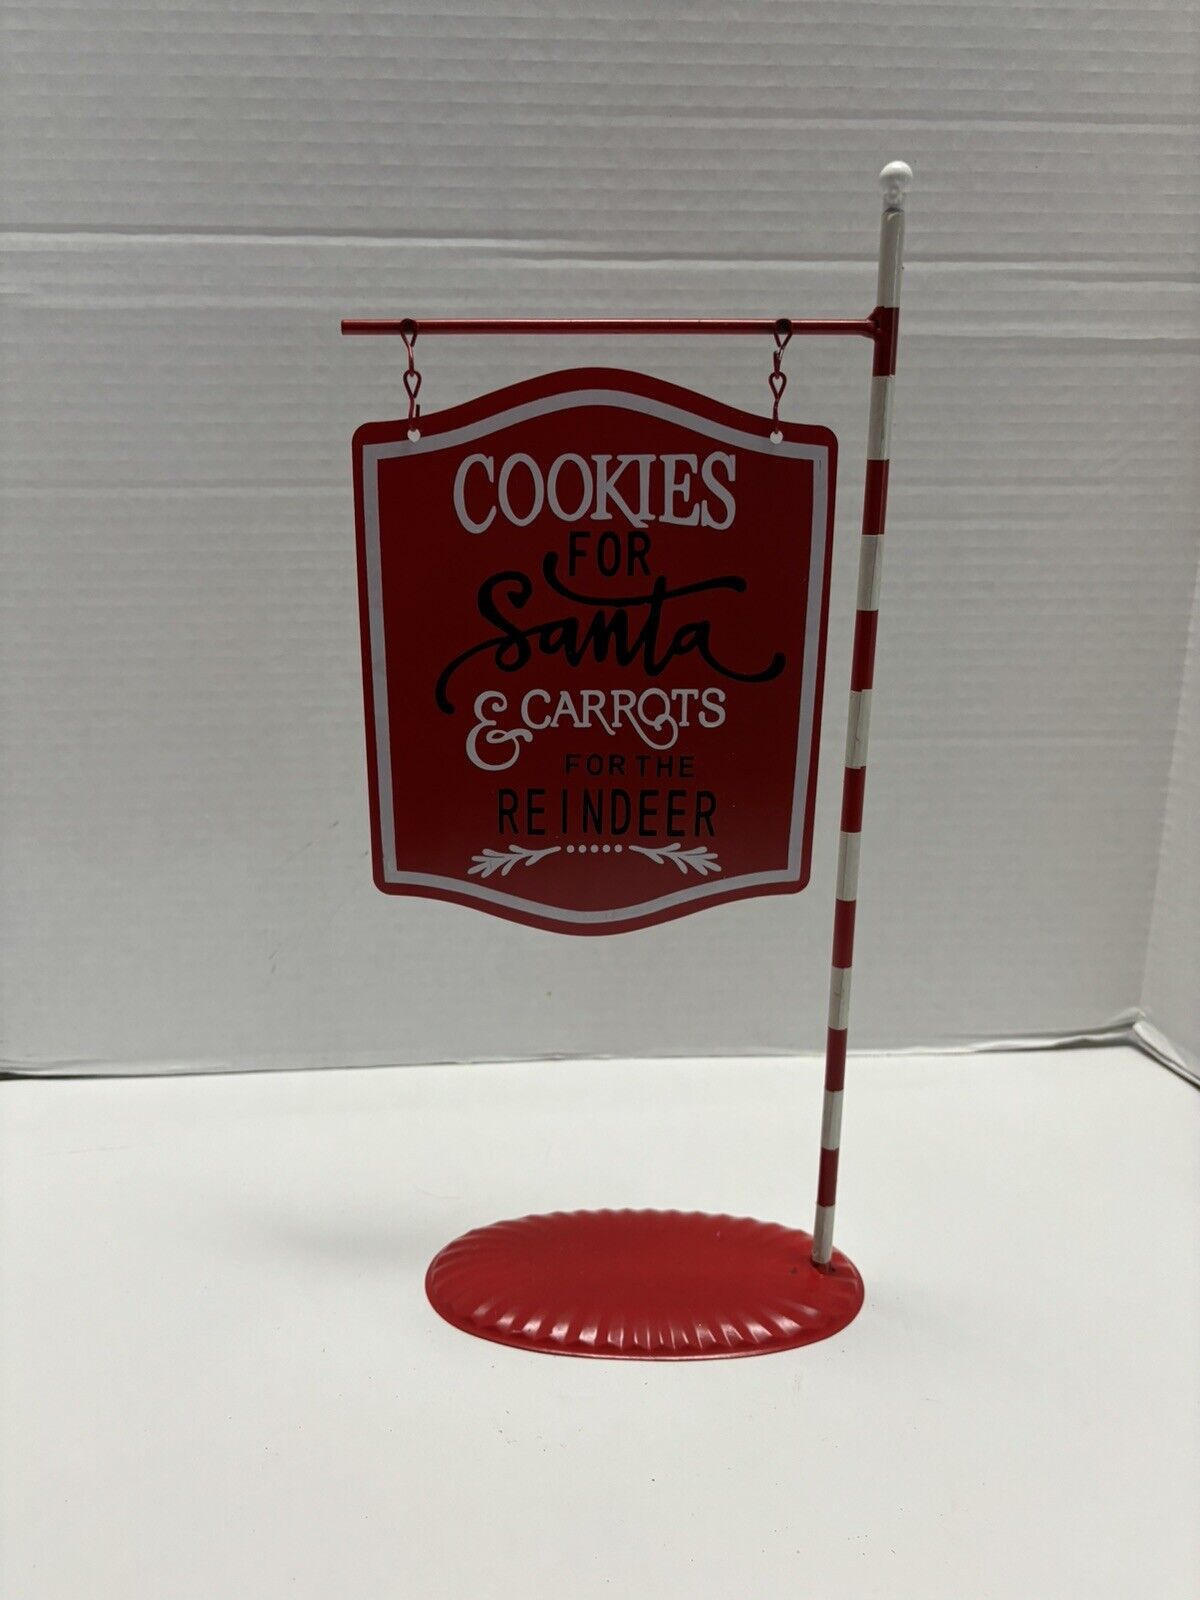 “Cookies for Santa & Carrots for the Reindeers Christmas Sign on Pole